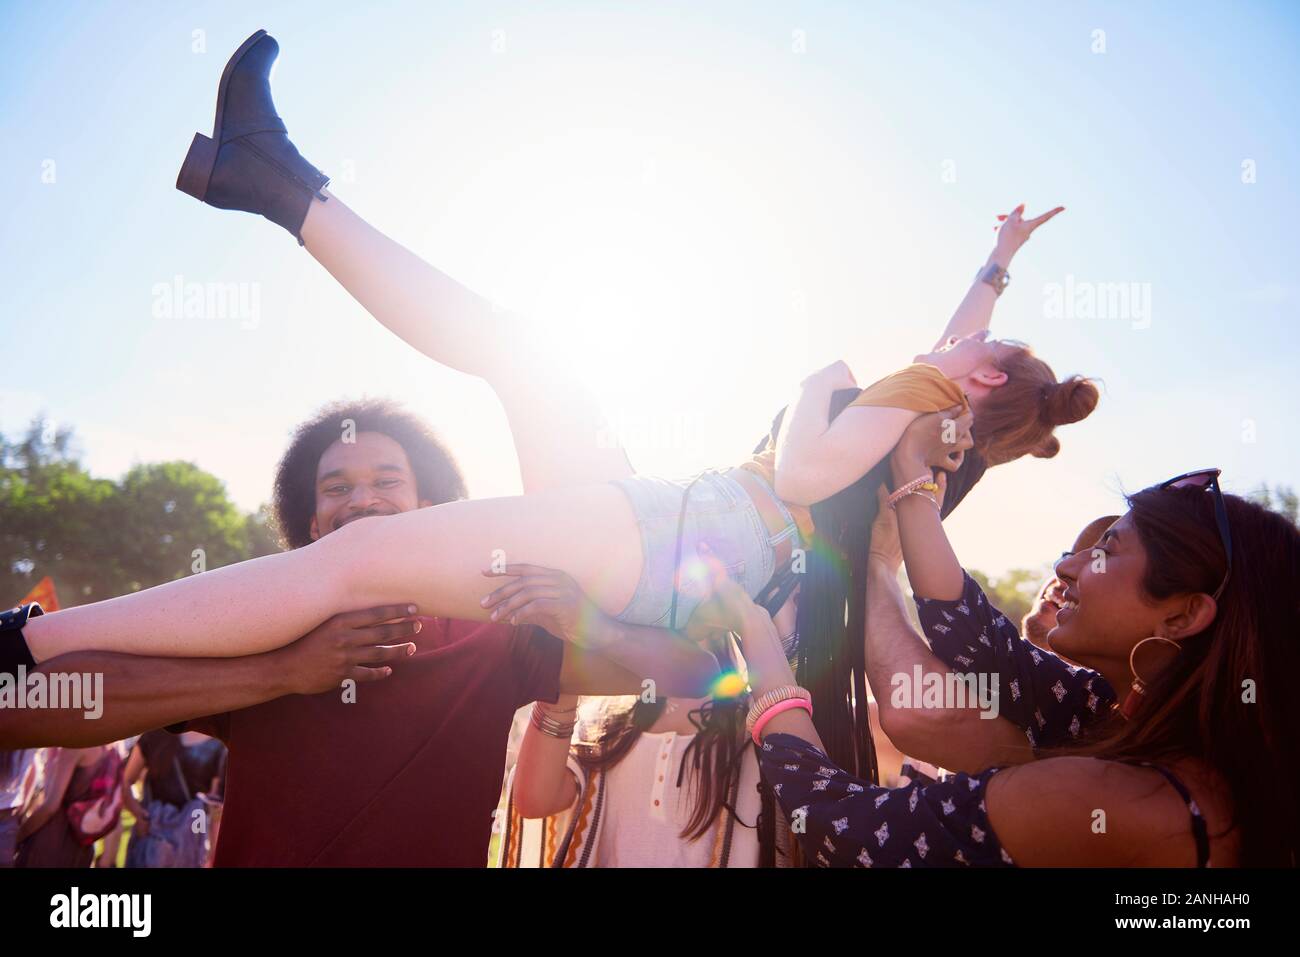 Excited woman crowd surfing at music festival Stock Photo